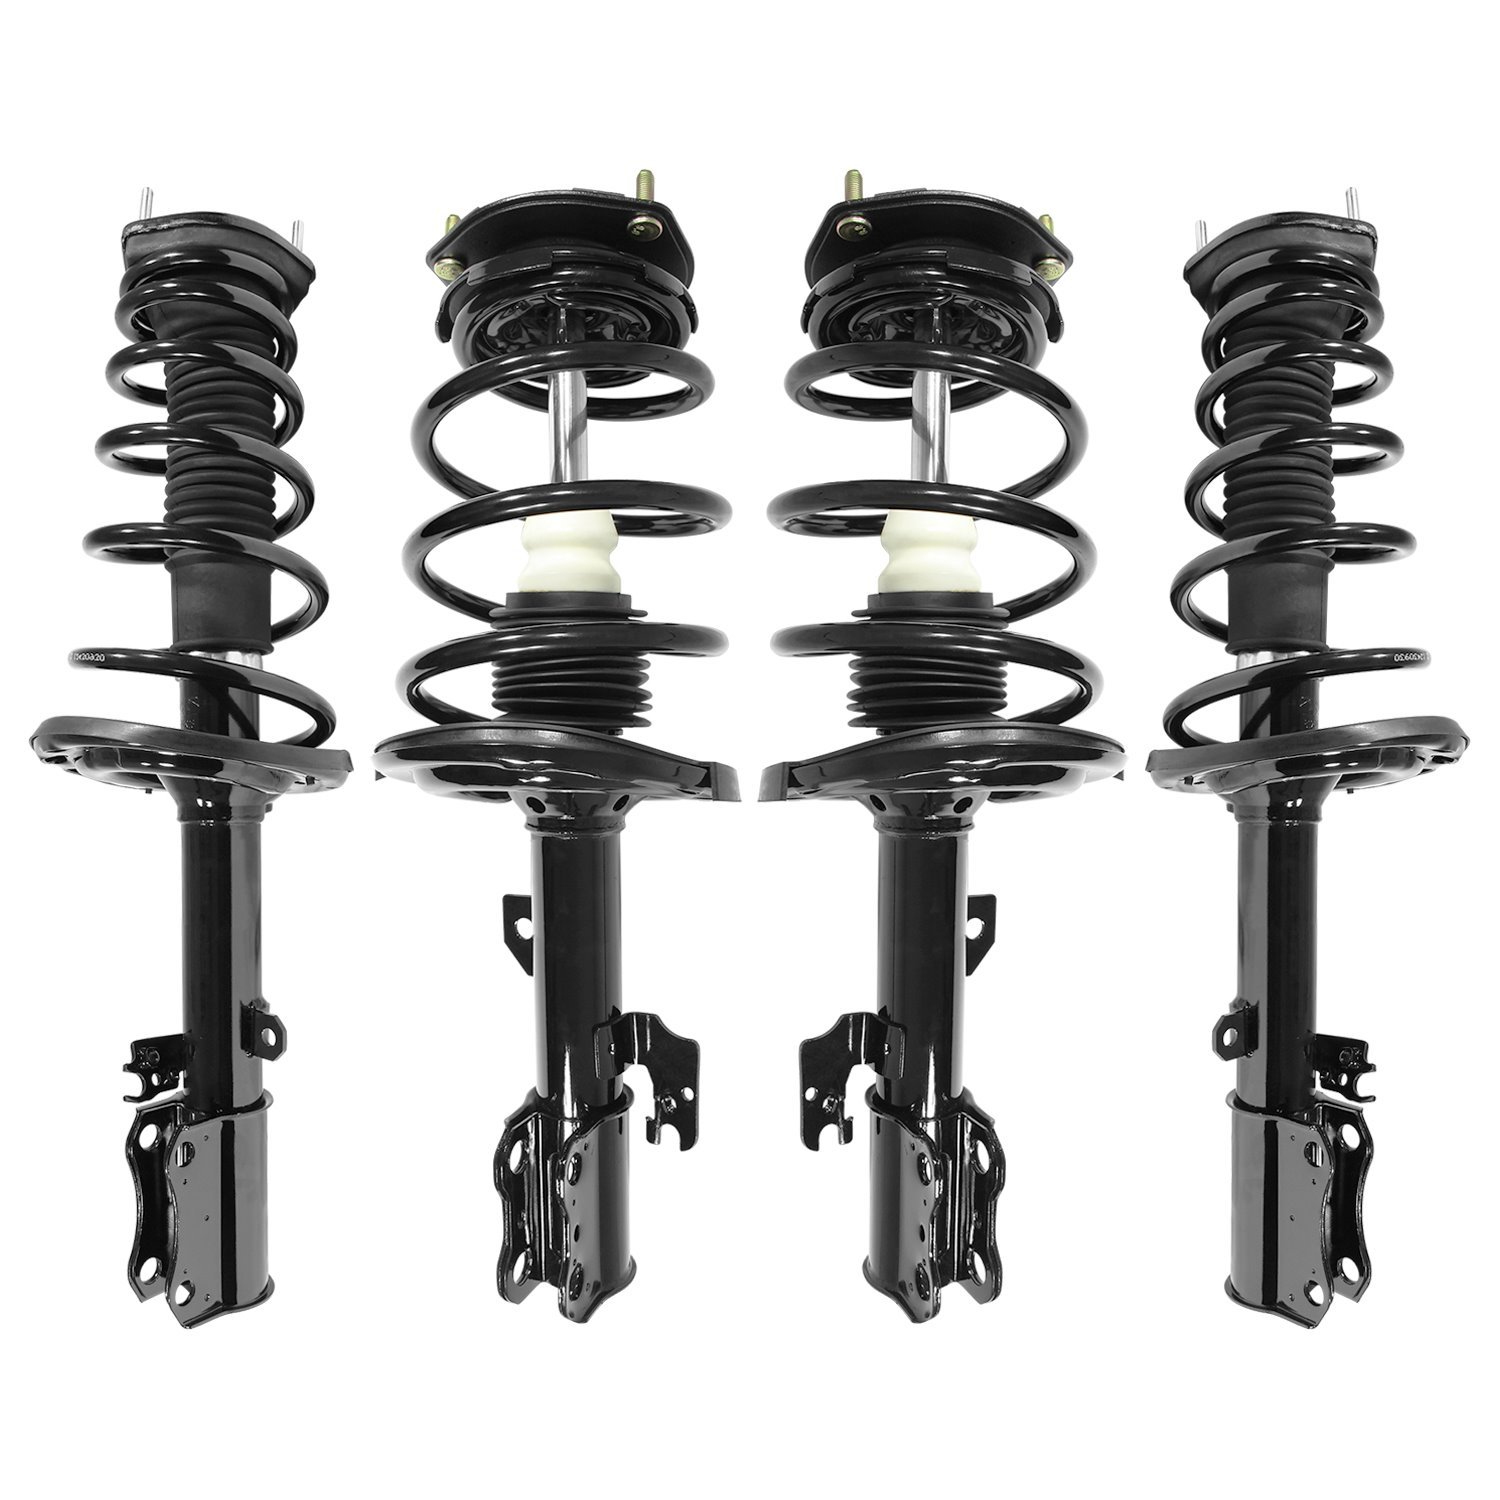 4-11711-15351-001 Front & Rear Suspension Strut & Coil Spring Assembly Kit Fits Select Lexus ES330, Toyota Camry, Toyota Solara